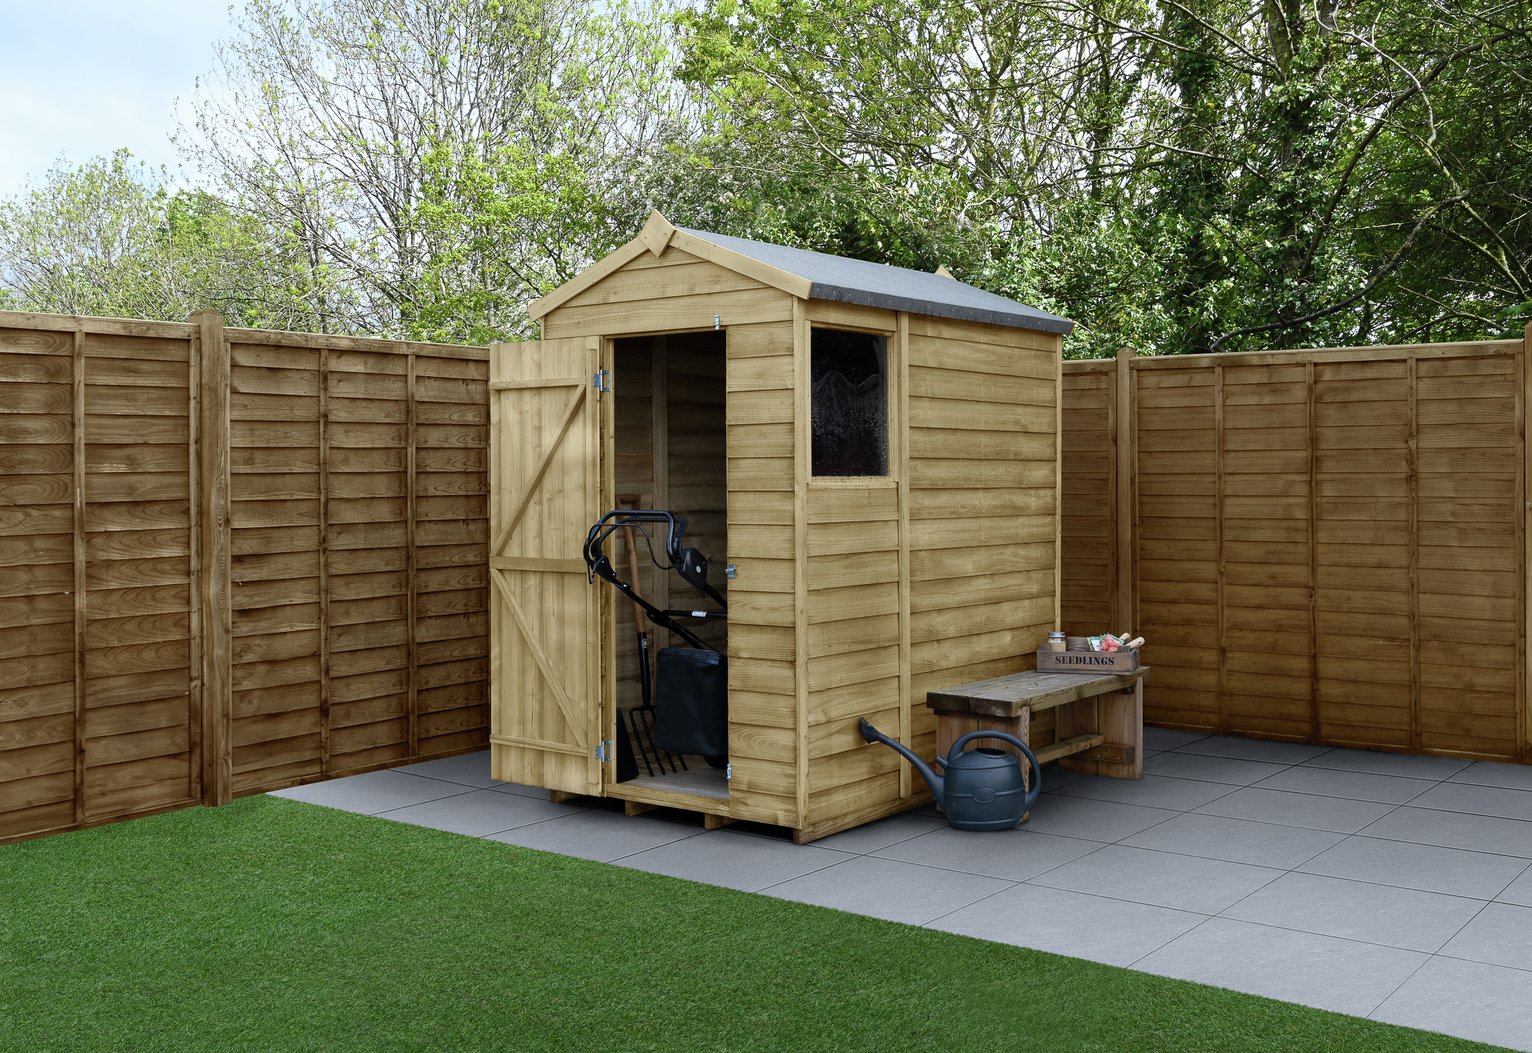 Forest Wooden 6 x 4ft Overlap Apex Shed